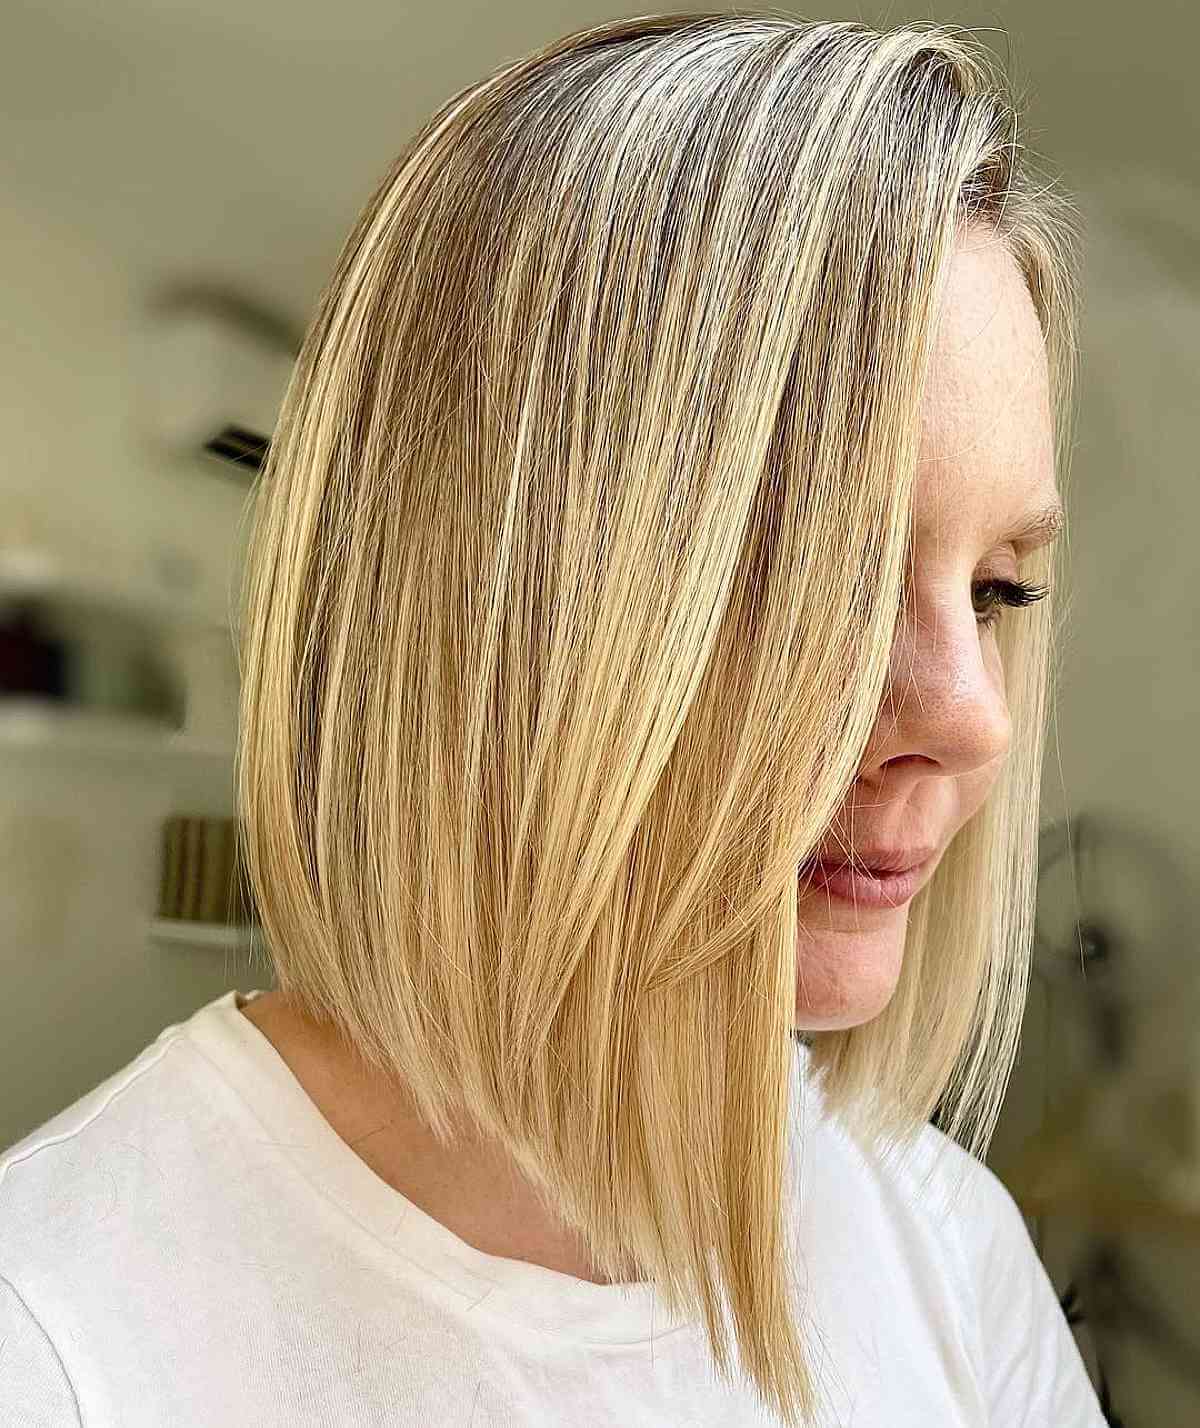 Medium-Length Bob Cut with a Side Part for a Woman Over 40